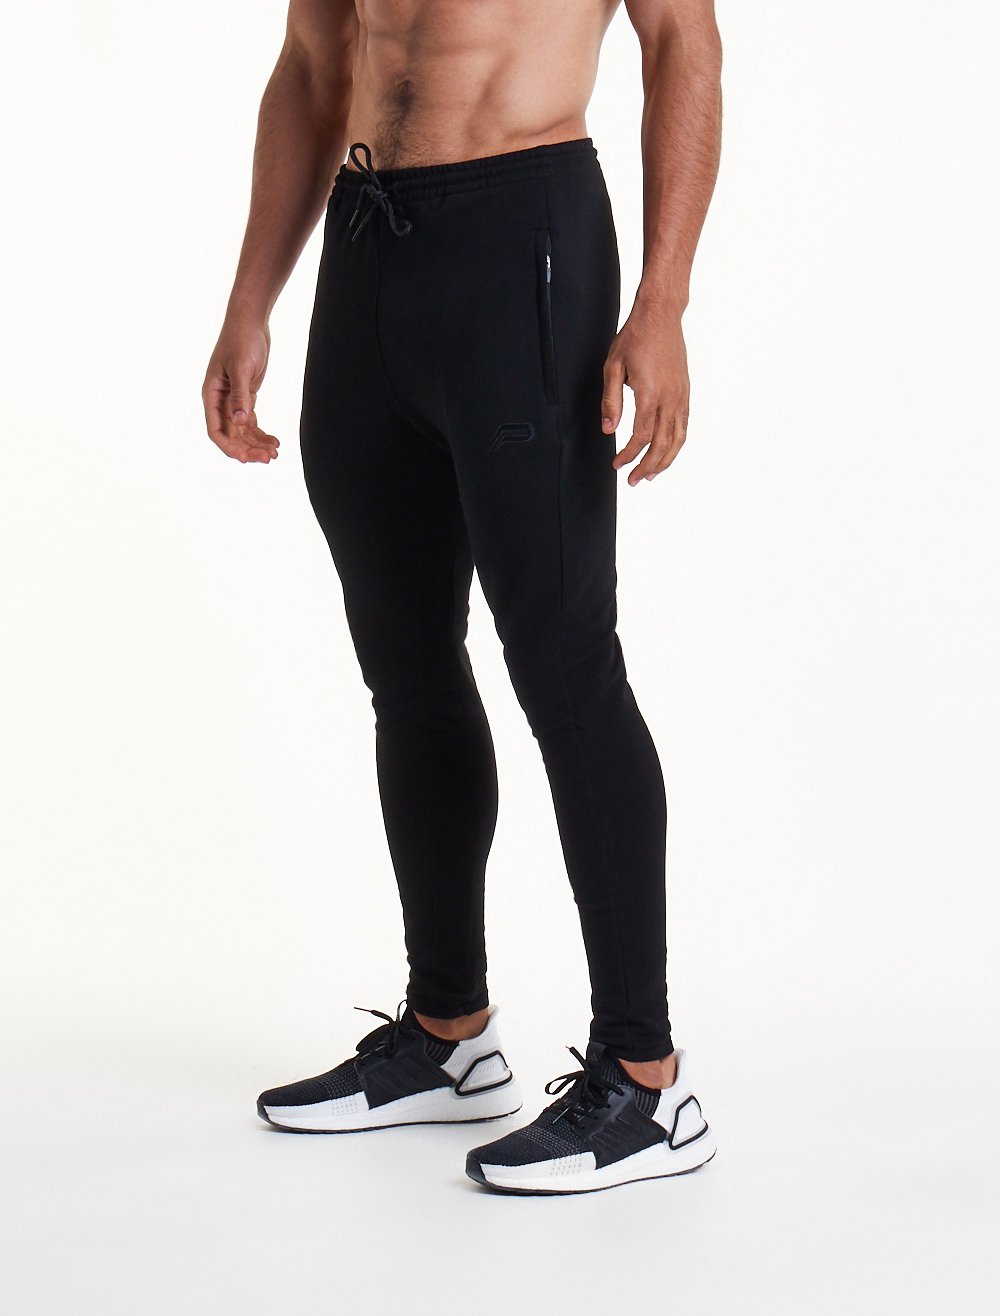 Pro-Fit Tapered Bottoms / Triple Black Pursue Fitness 1